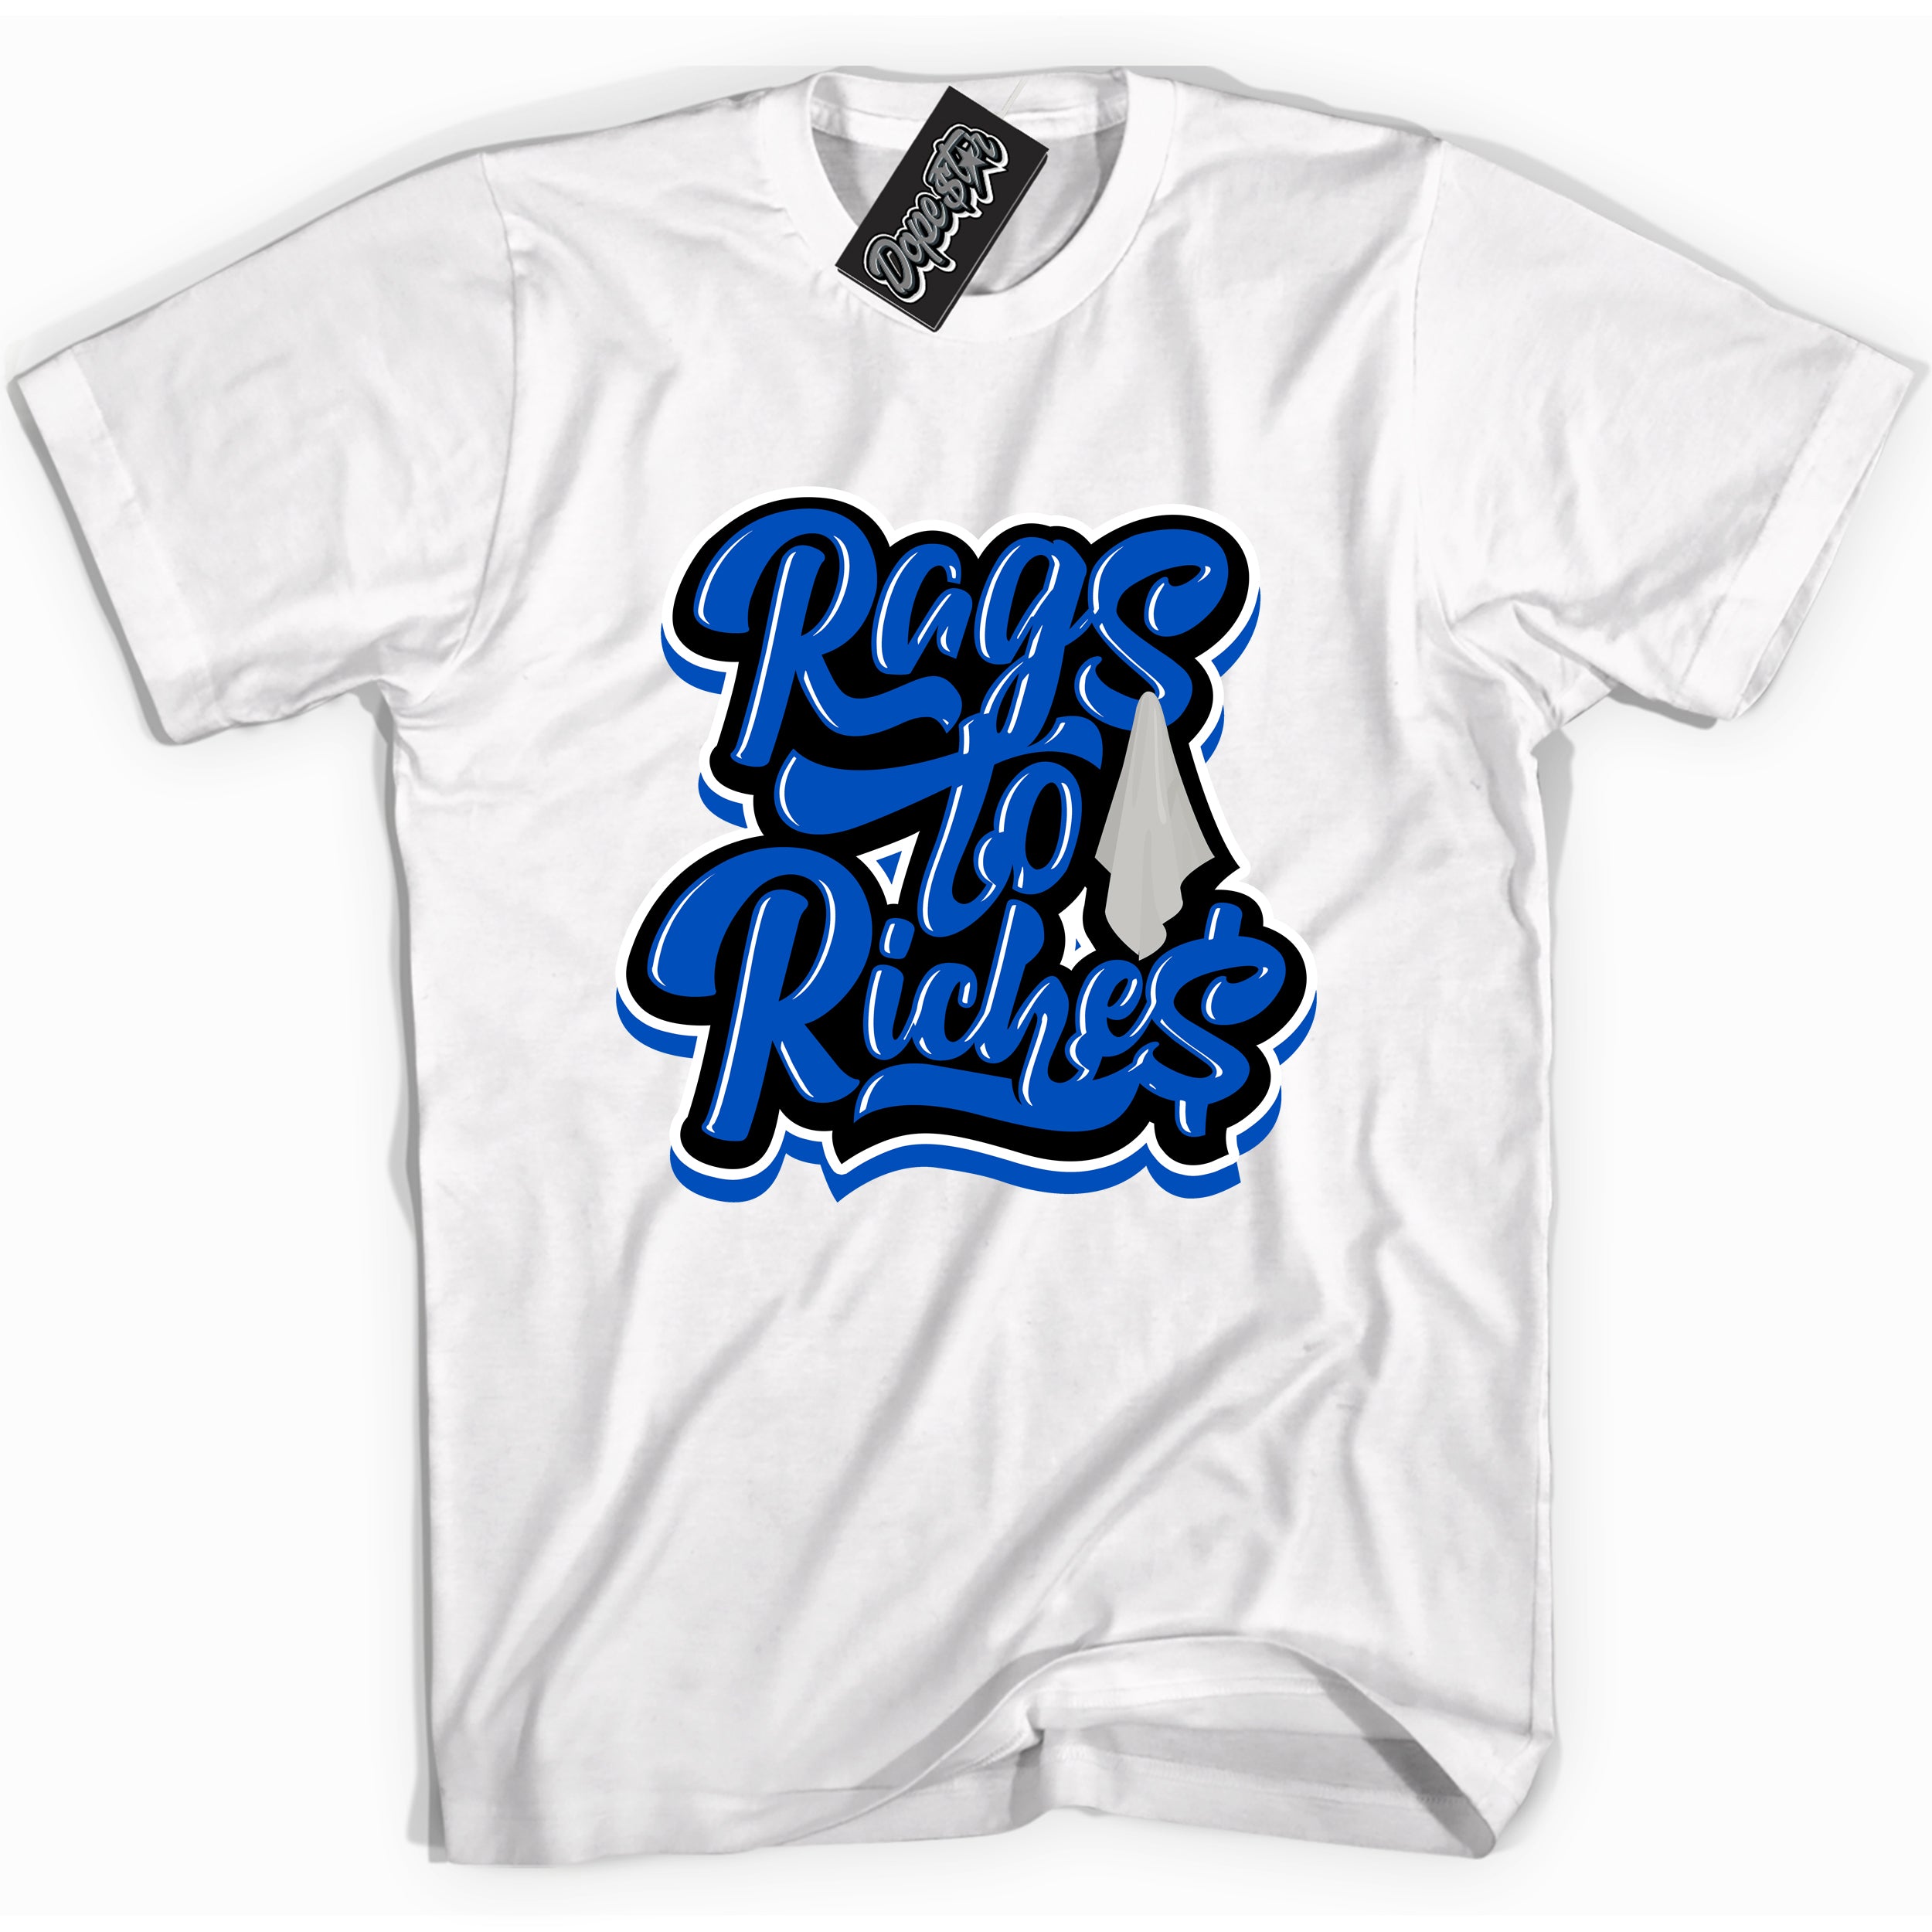 Cool White graphic tee with Rags To Riches print, that perfectly matches OG Royal Reimagined 1s sneakers 